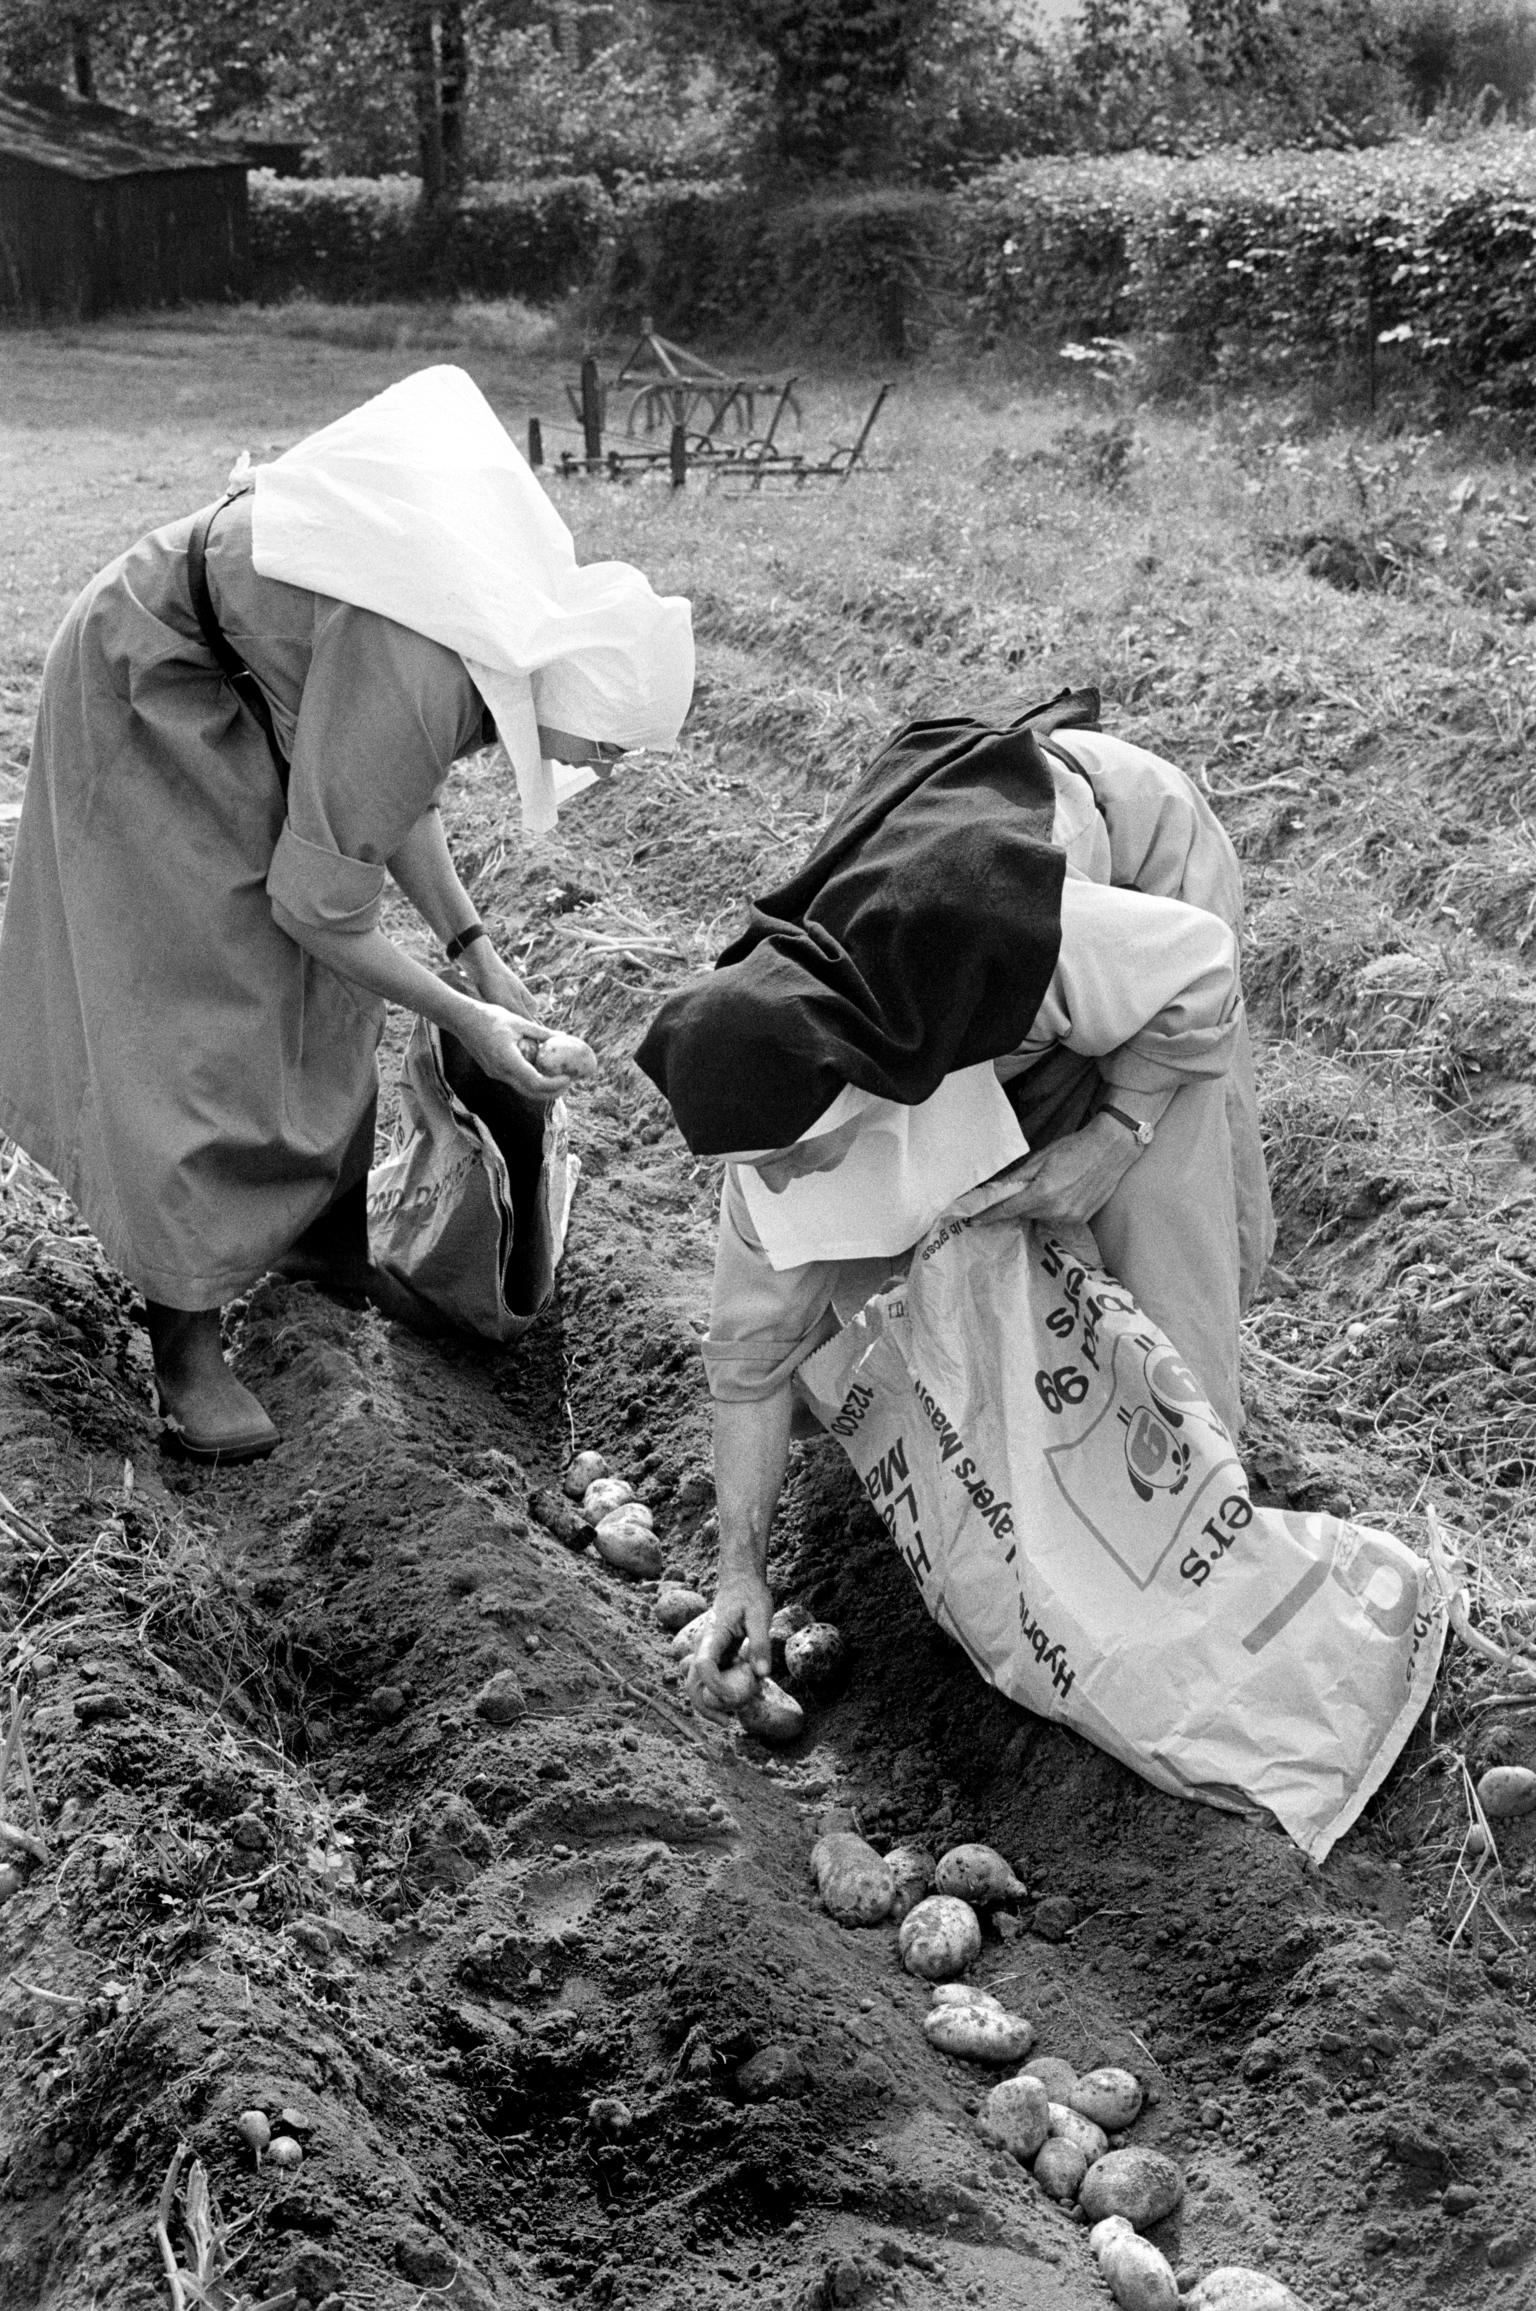 Nuns of the society of the sacred Cross at Tymawr Convent. A self-sufficient closed order, hand picking potatoes. Lydart, Wales